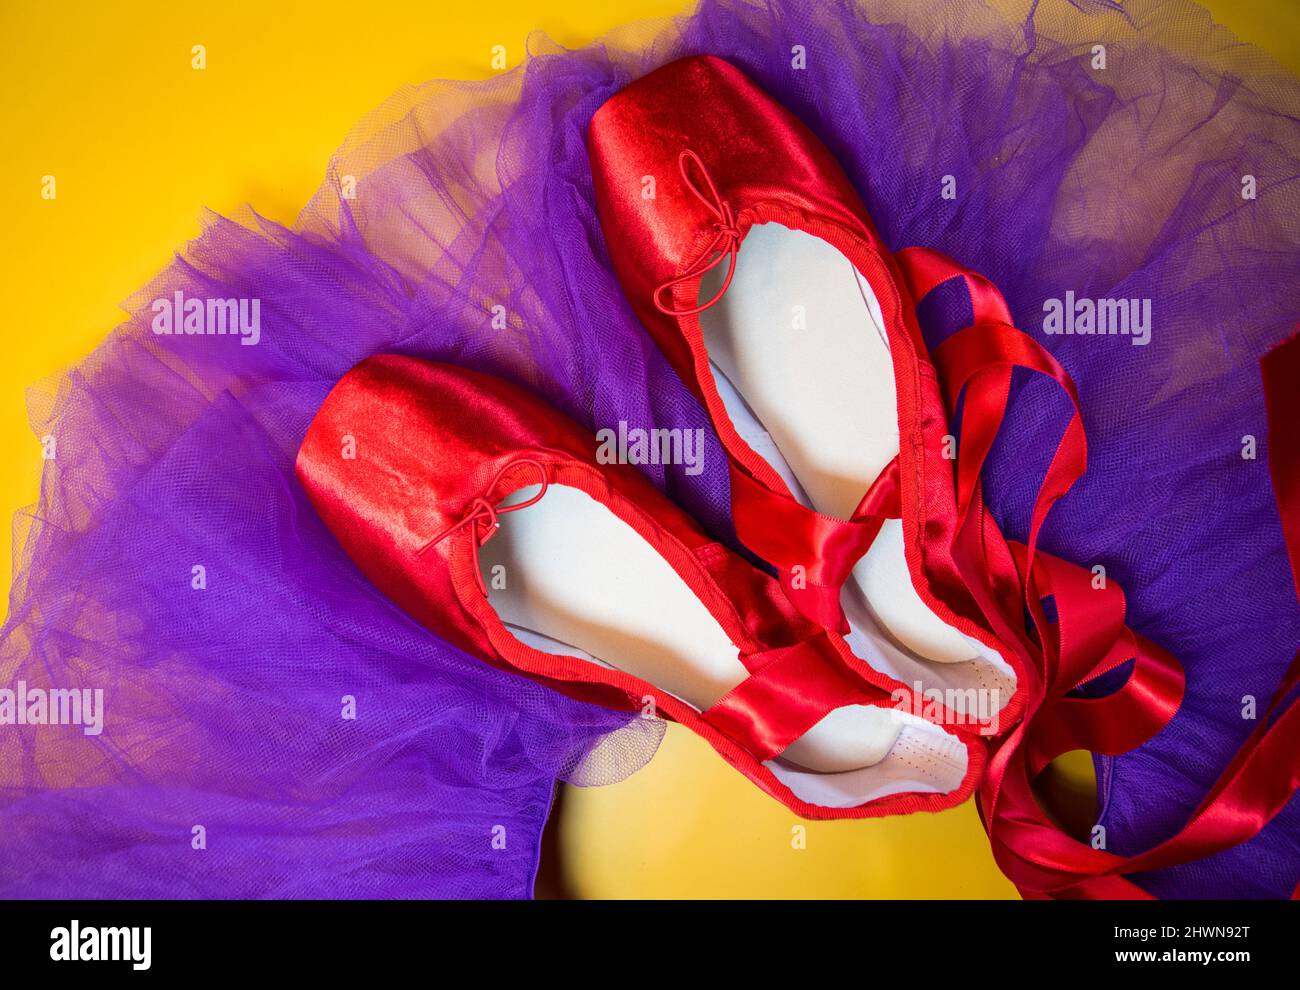 Red ballet pointe shoes set on top of a purple tutu, and a yellow background. Stock Photo